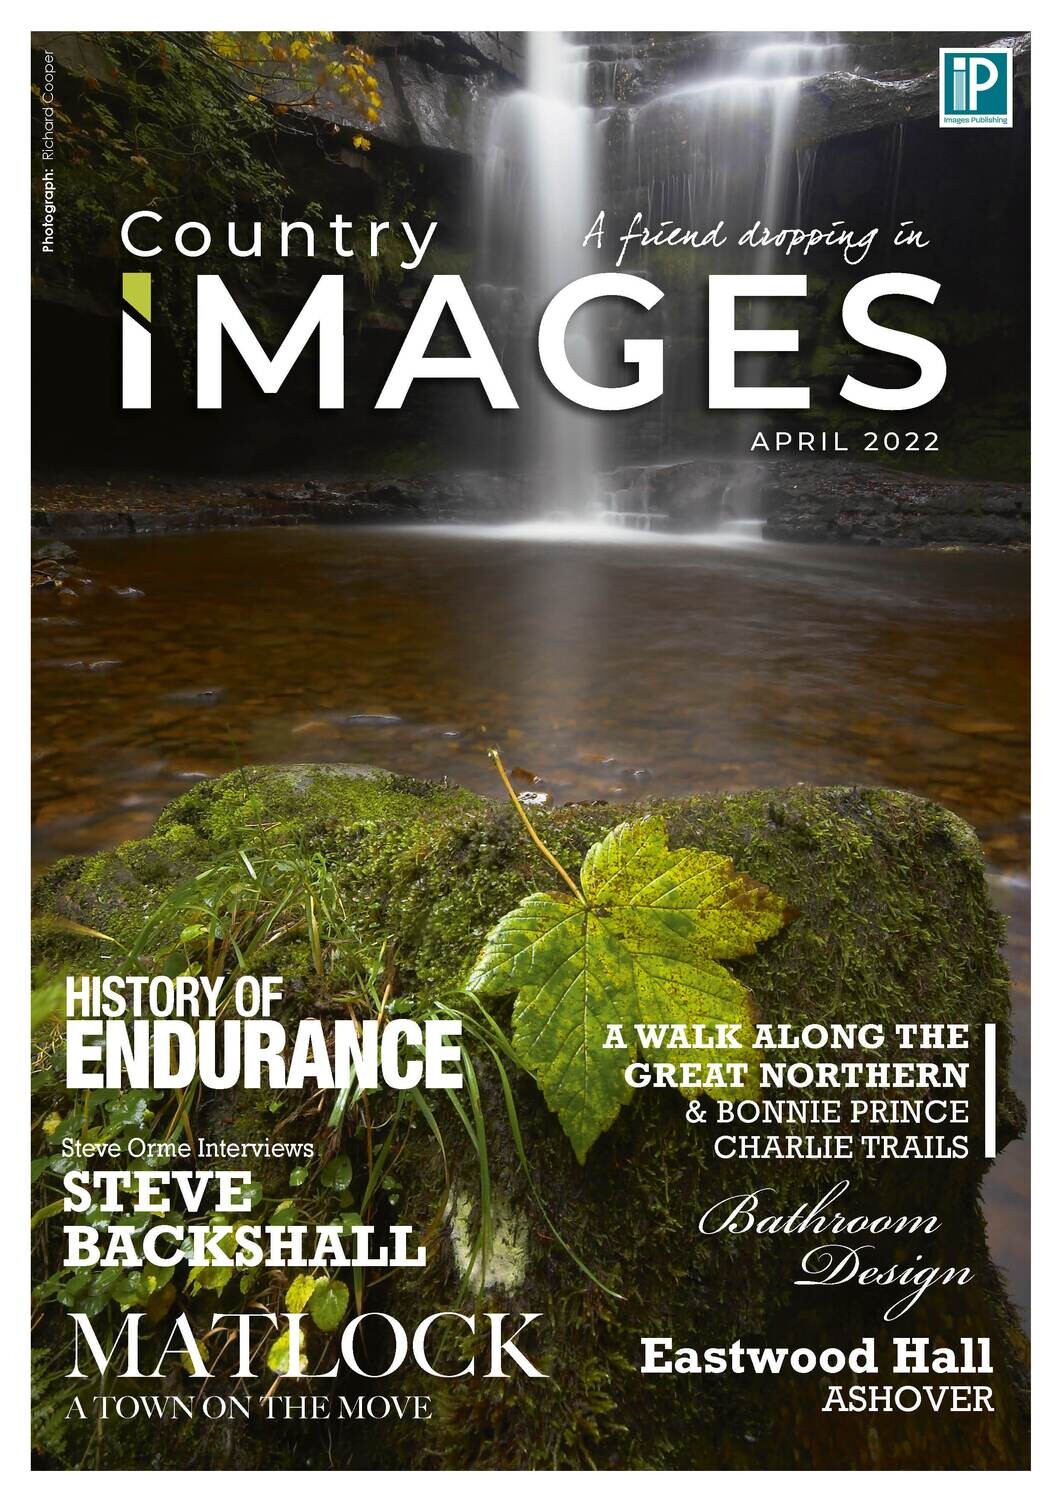 Country Images - NORTH Magazine Subscription